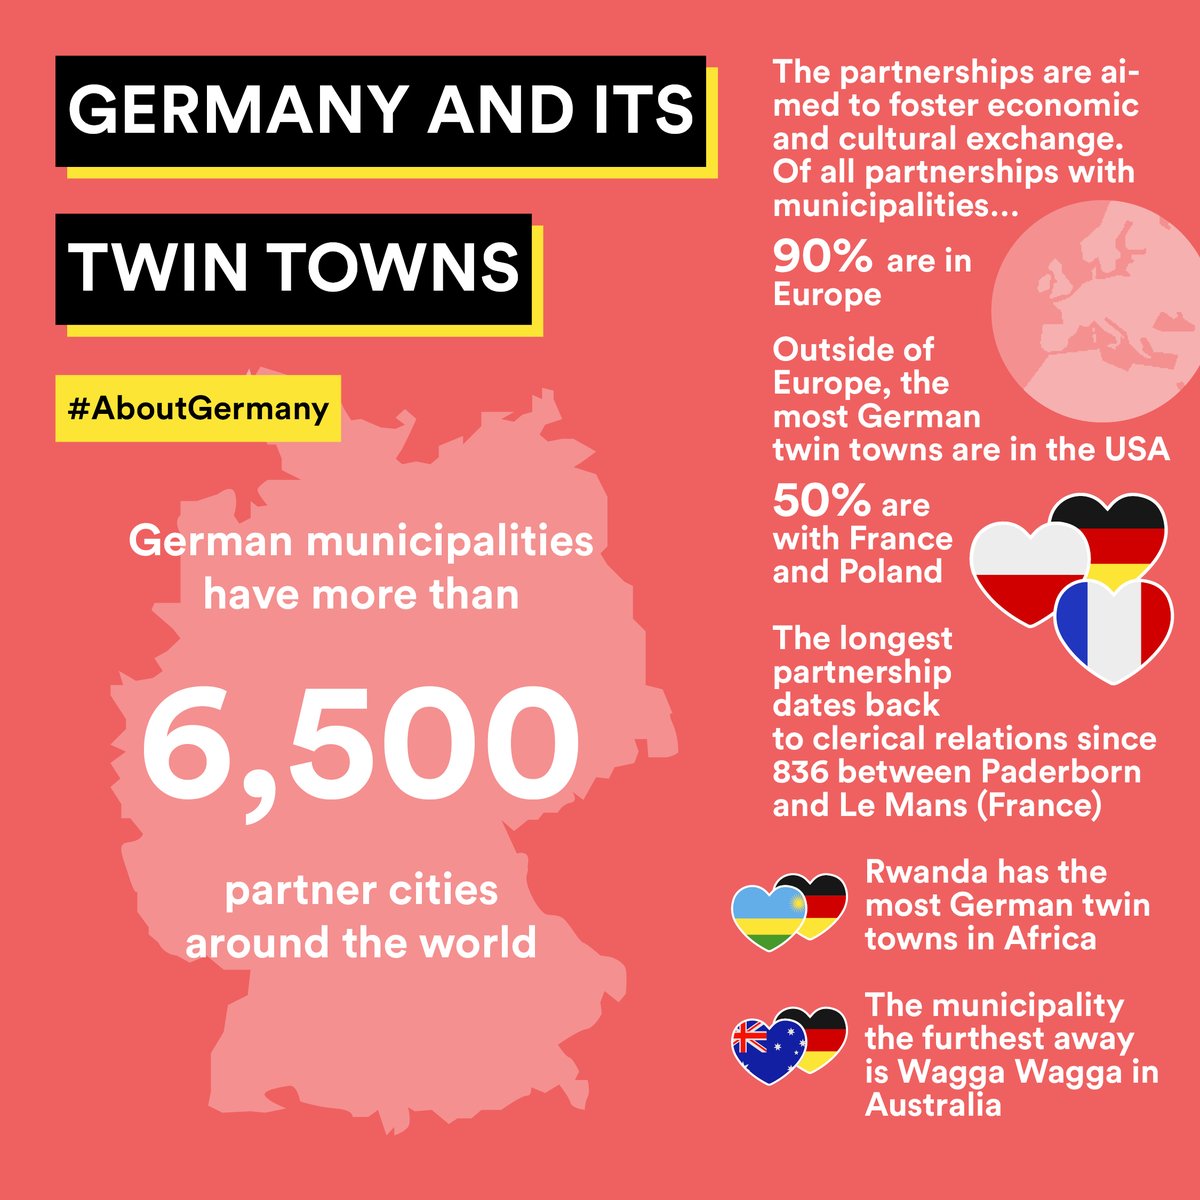 😳 #DYK that German cities have over 6,500 of town-twinning partnerships worldwide? #Germany's oldest #towntwinning arrangement has been in place for over 1000 years! 

💬 ❓ Have you ever checked if your city has a twin city in Germany? 

#AboutGermany #Partnership #Cooperation